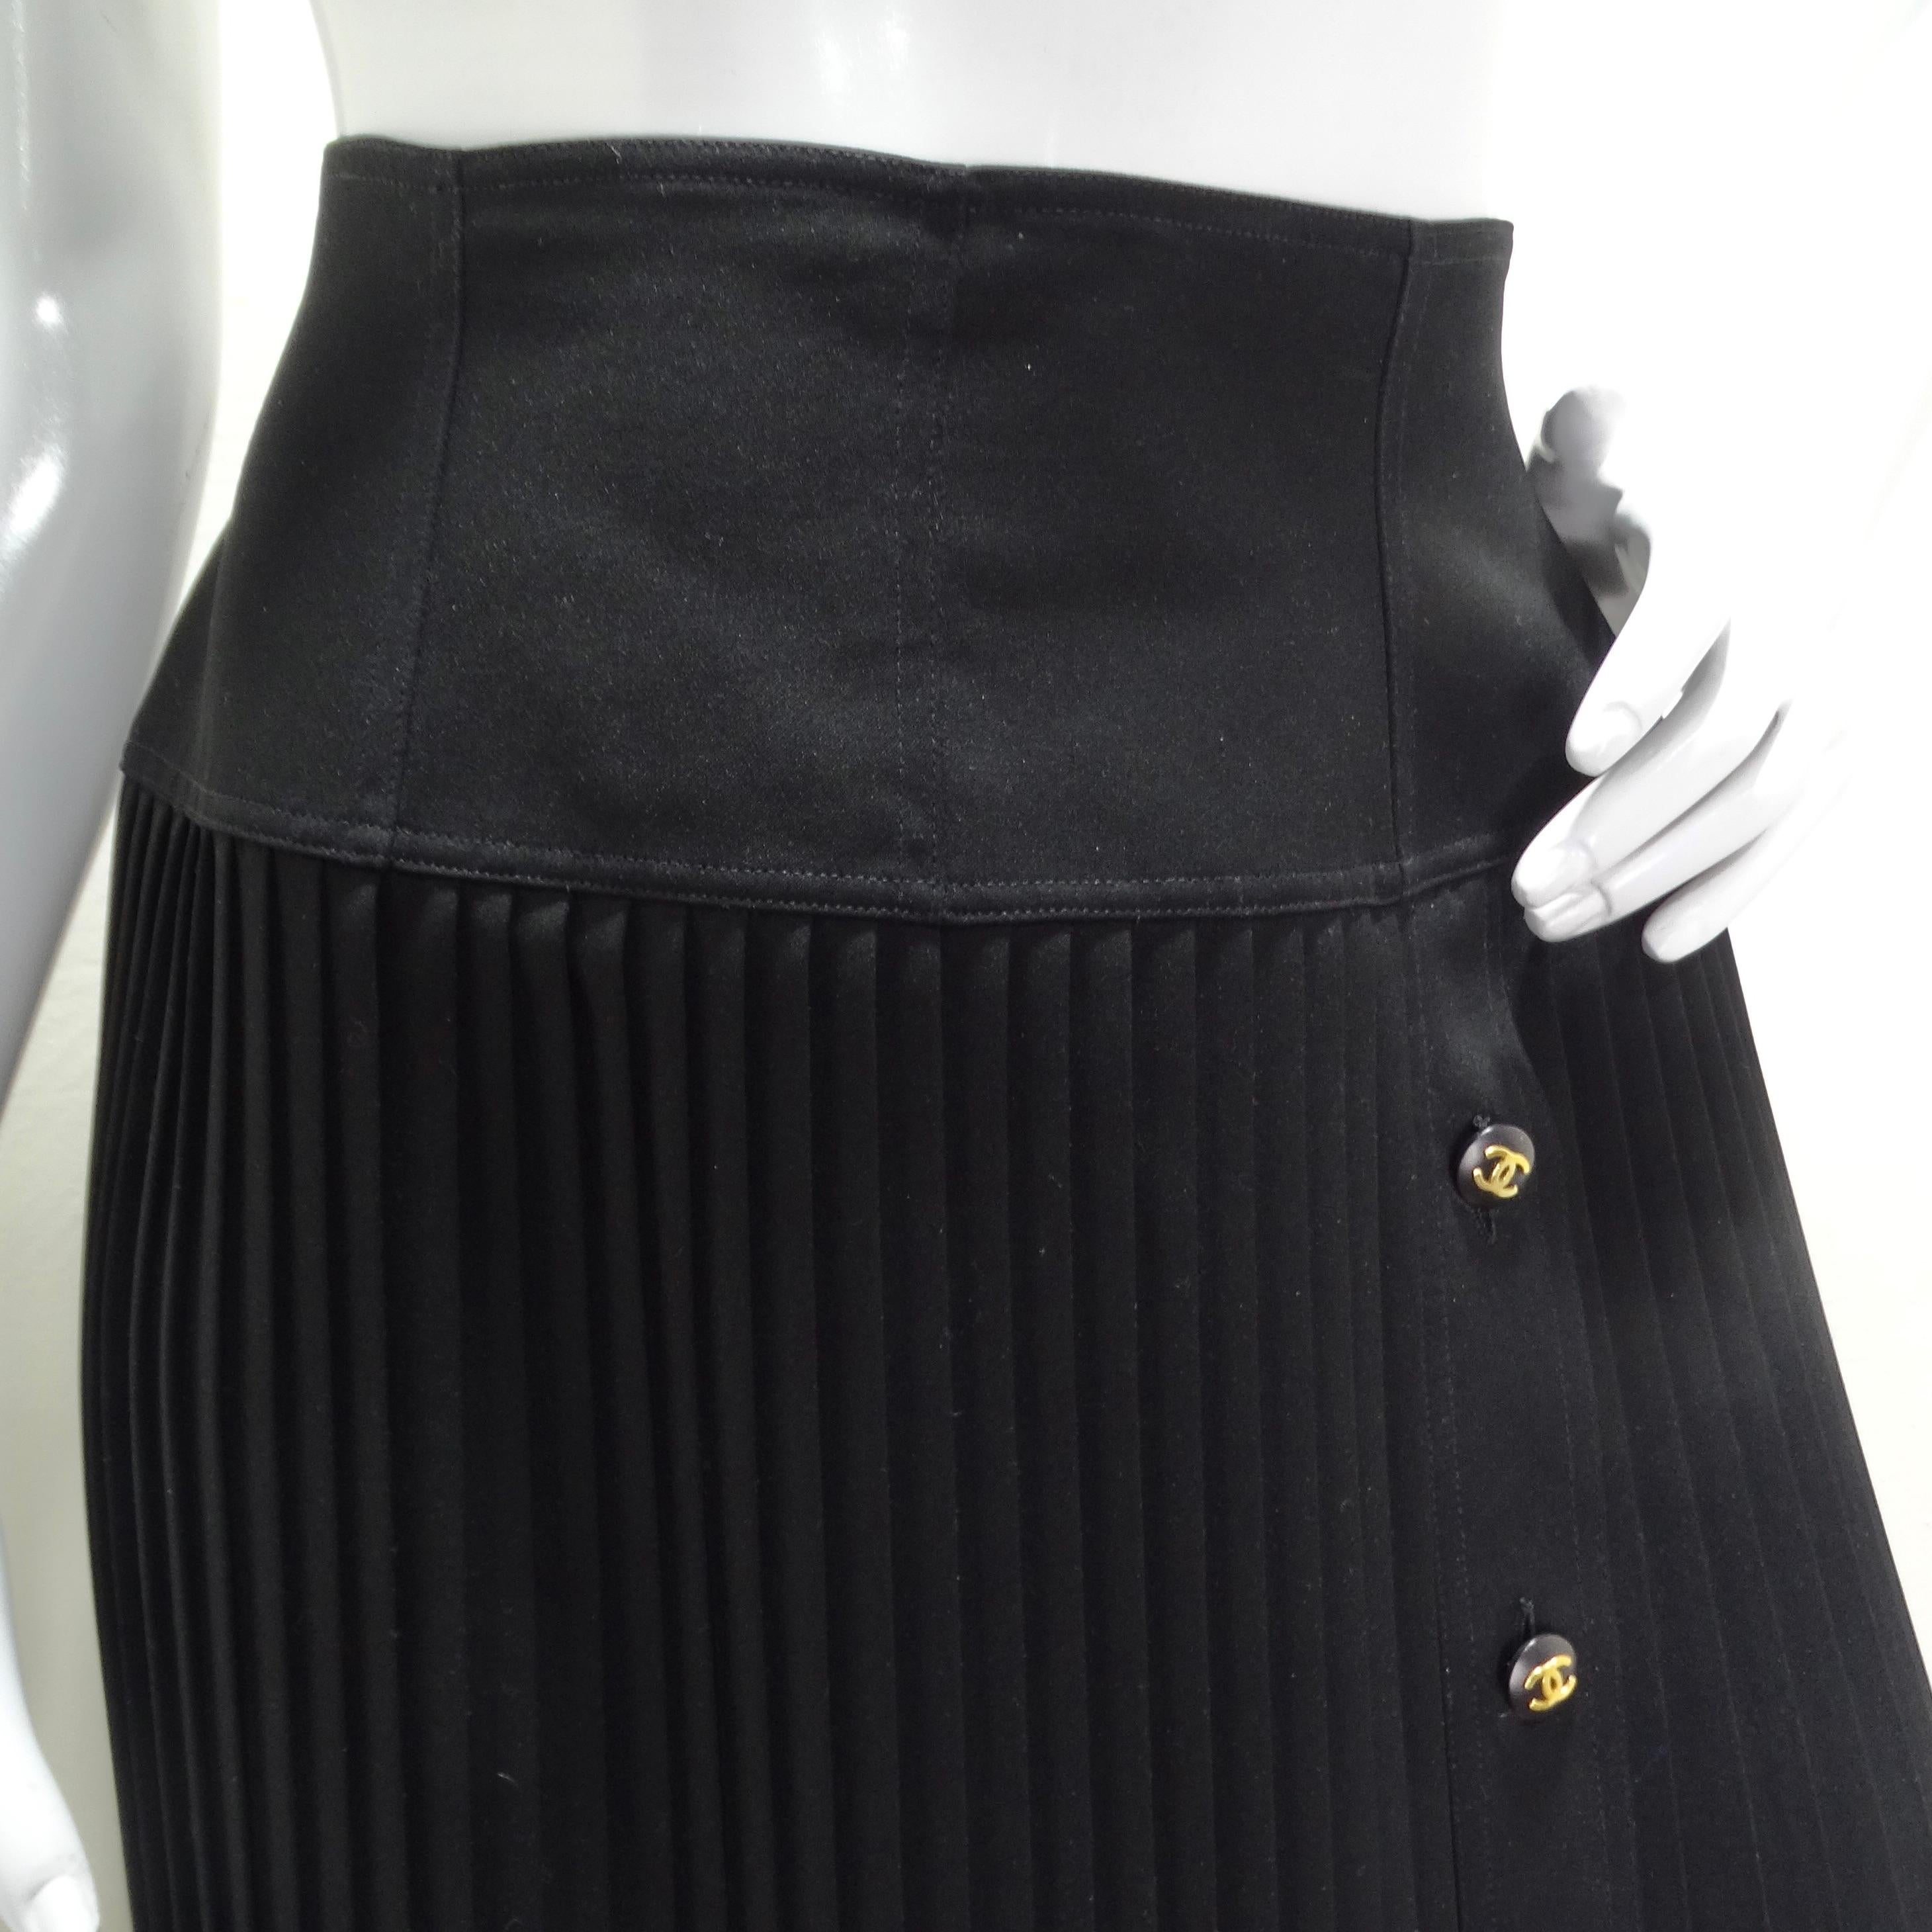 Embrace vintage elegance with the Chanel 90s Black Pleated Midi Skirt. This gorgeous skirt boasts a synched waistband, a subtle side zipper, and a flowy mid-length pleated body. Adorned with a row of black buttons featuring the iconic gold-toned